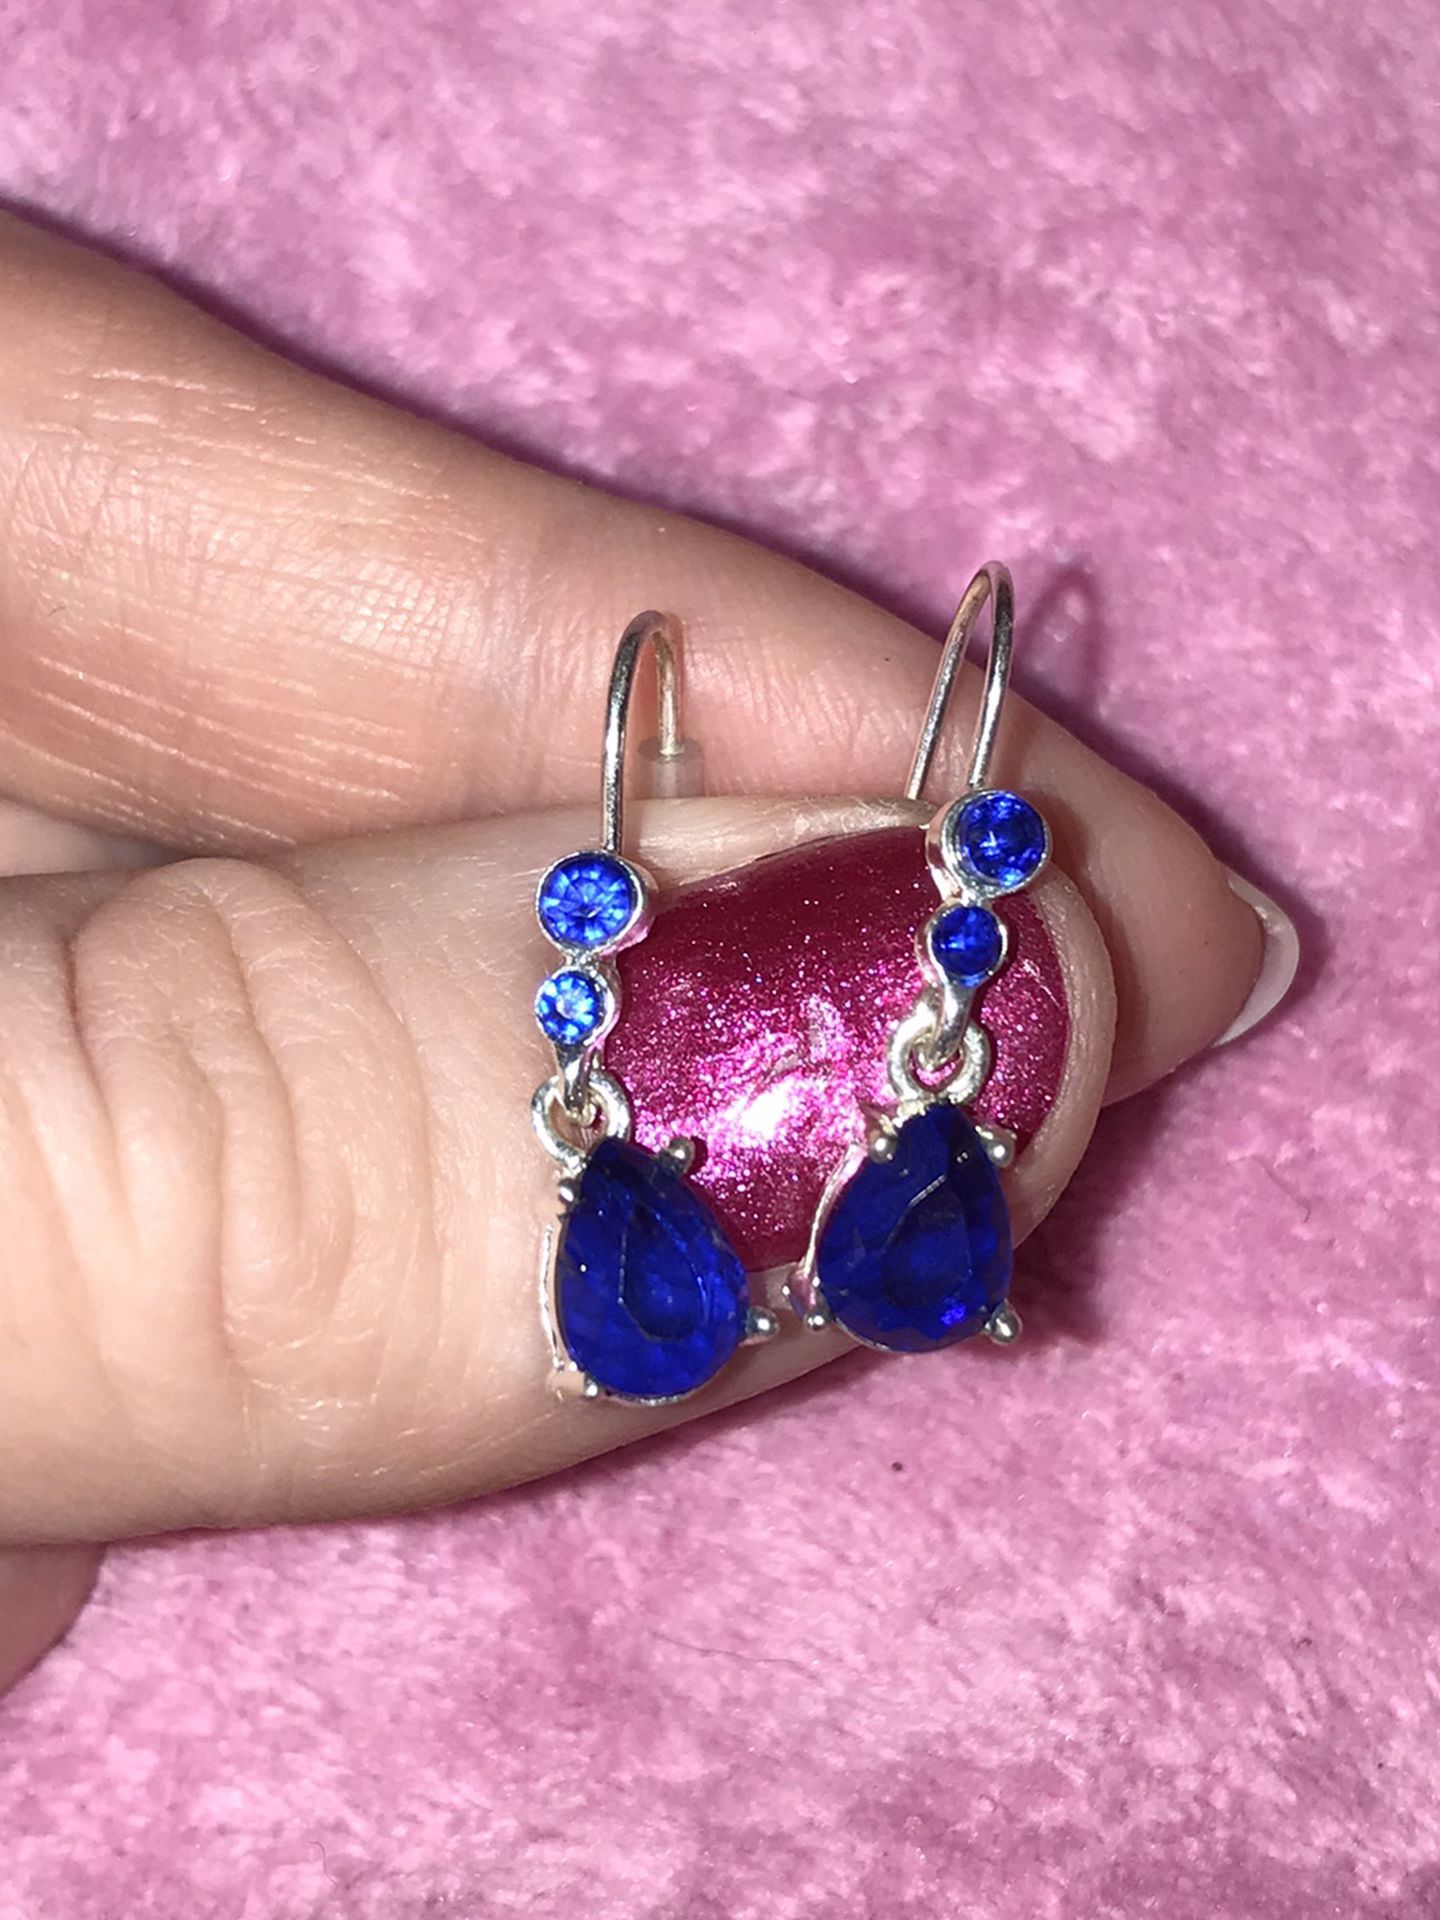 New Silver And Blue Earrings 💙 $3